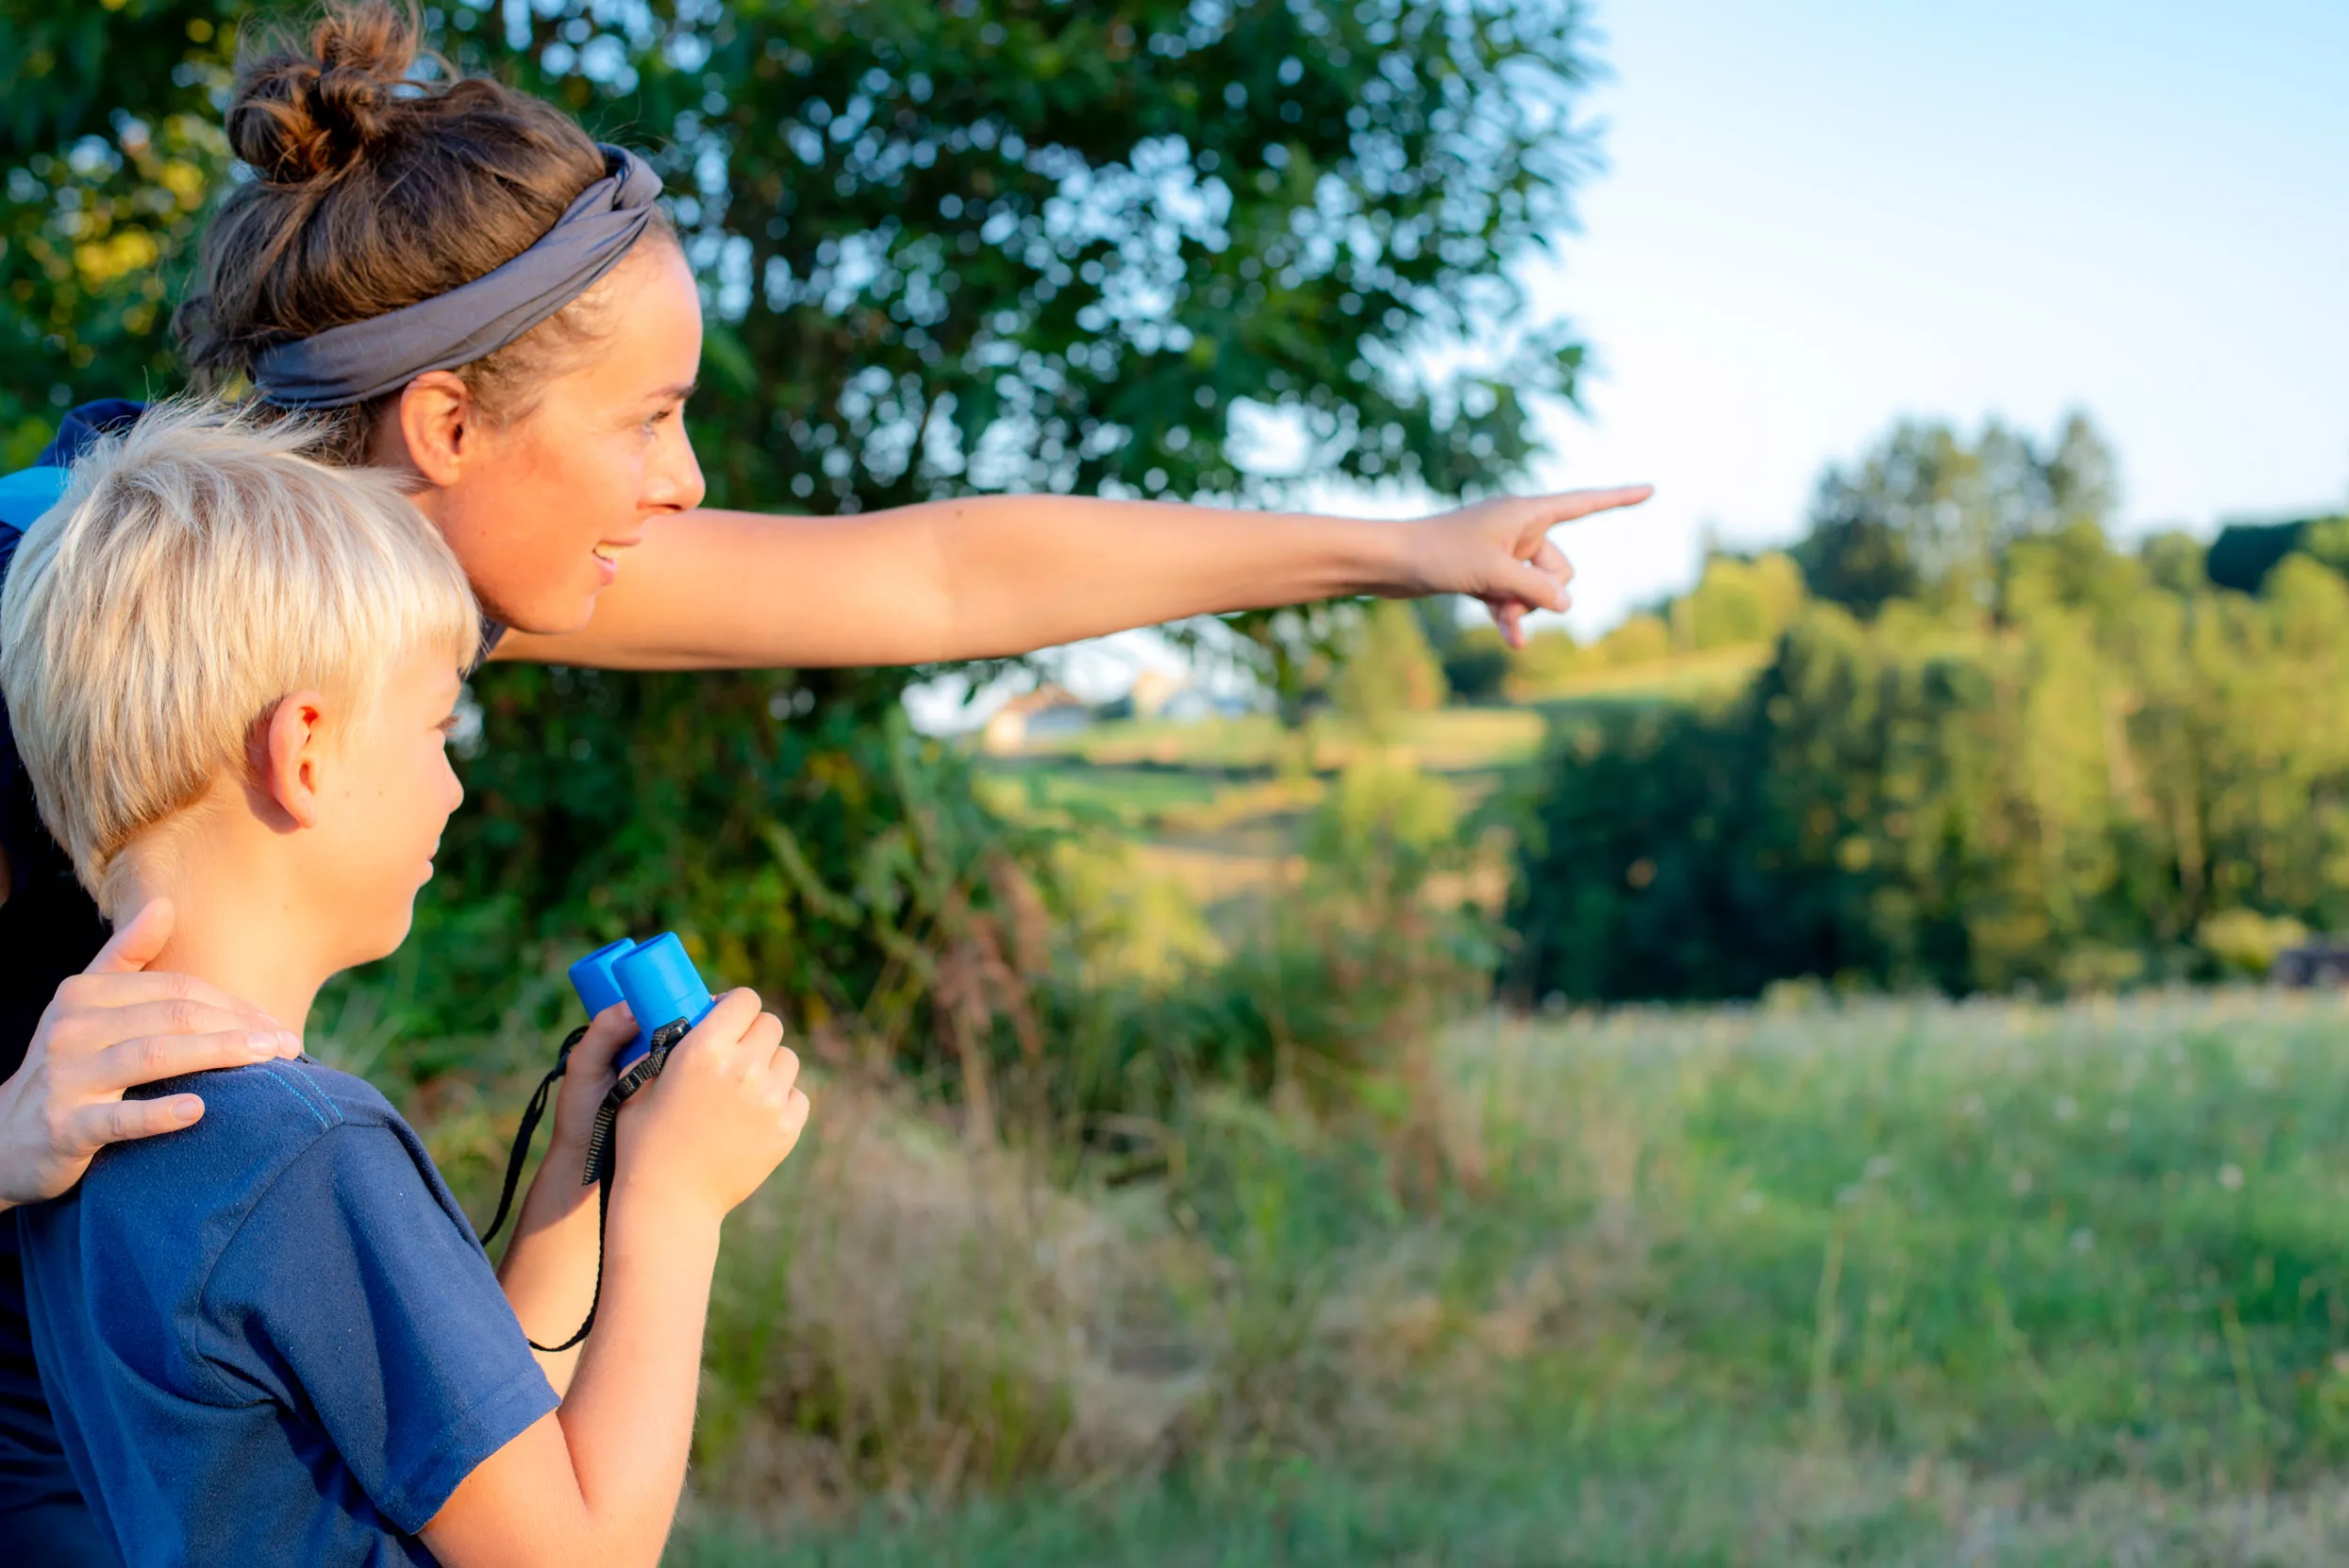 An adult pointing across a grassy field, teaching a child how to use binoculars.